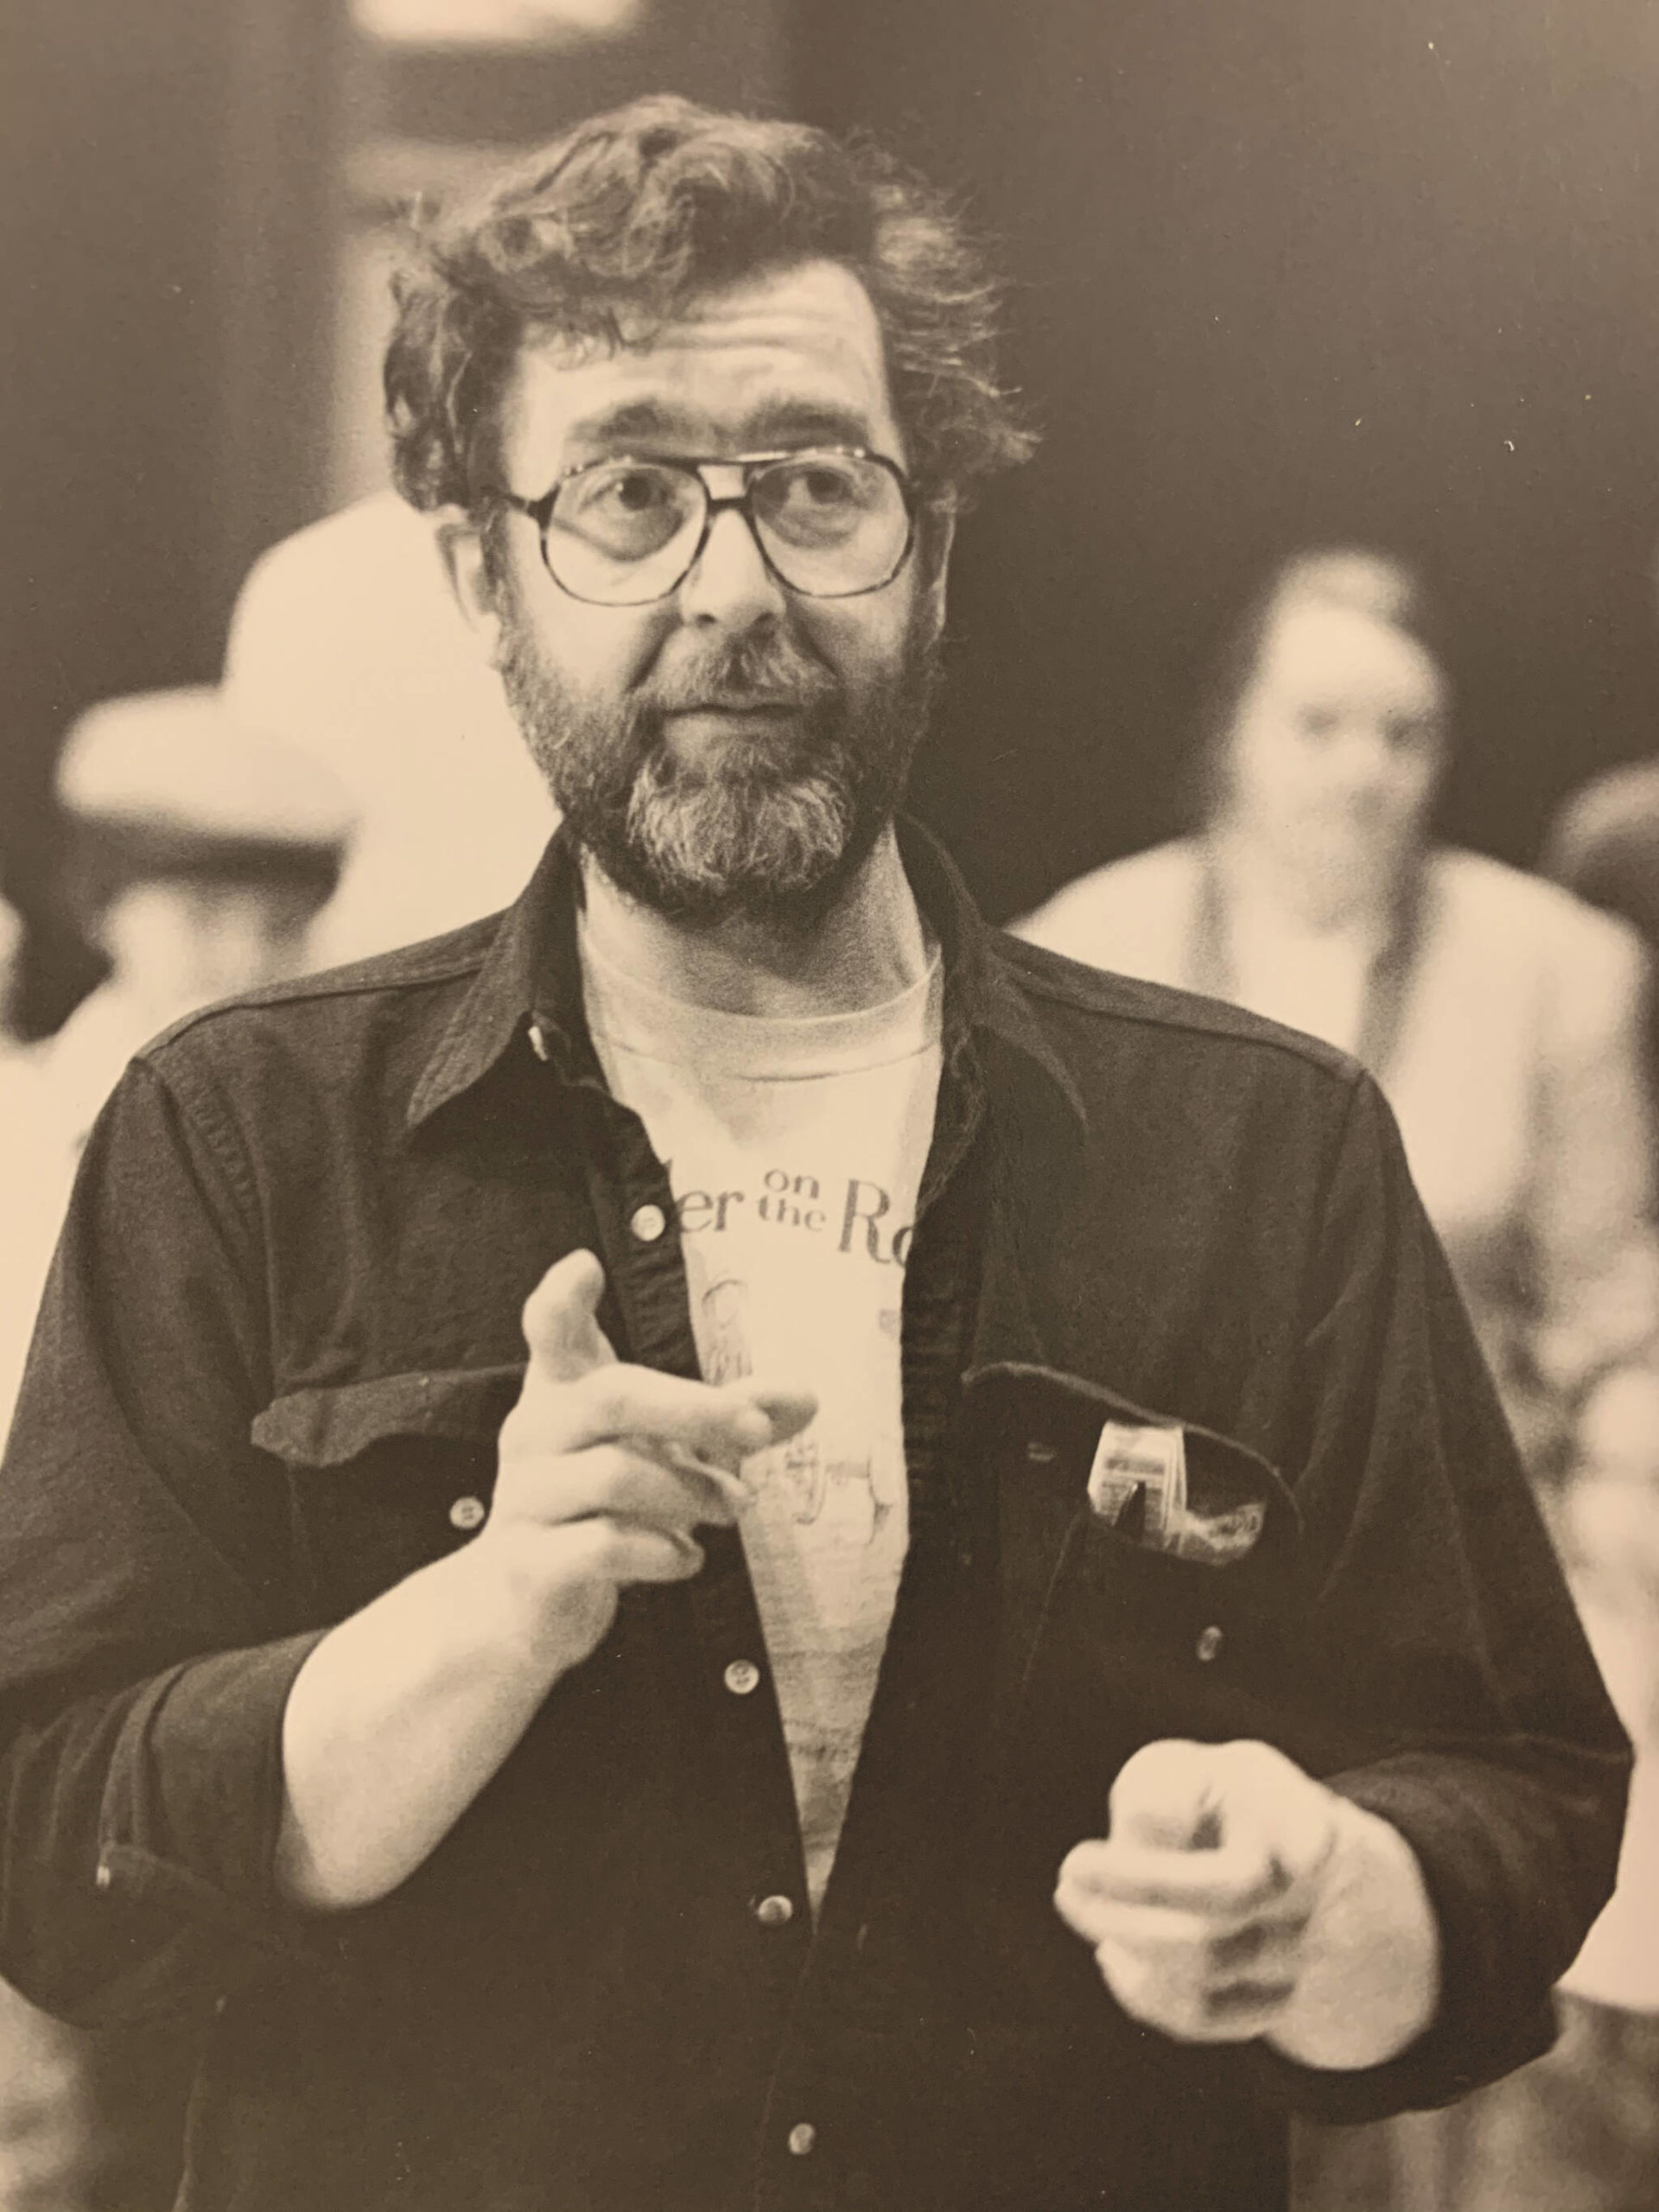 Lance Petersen directs “The Music Man” in a Pier One production of the 1970s. (Photo provided)